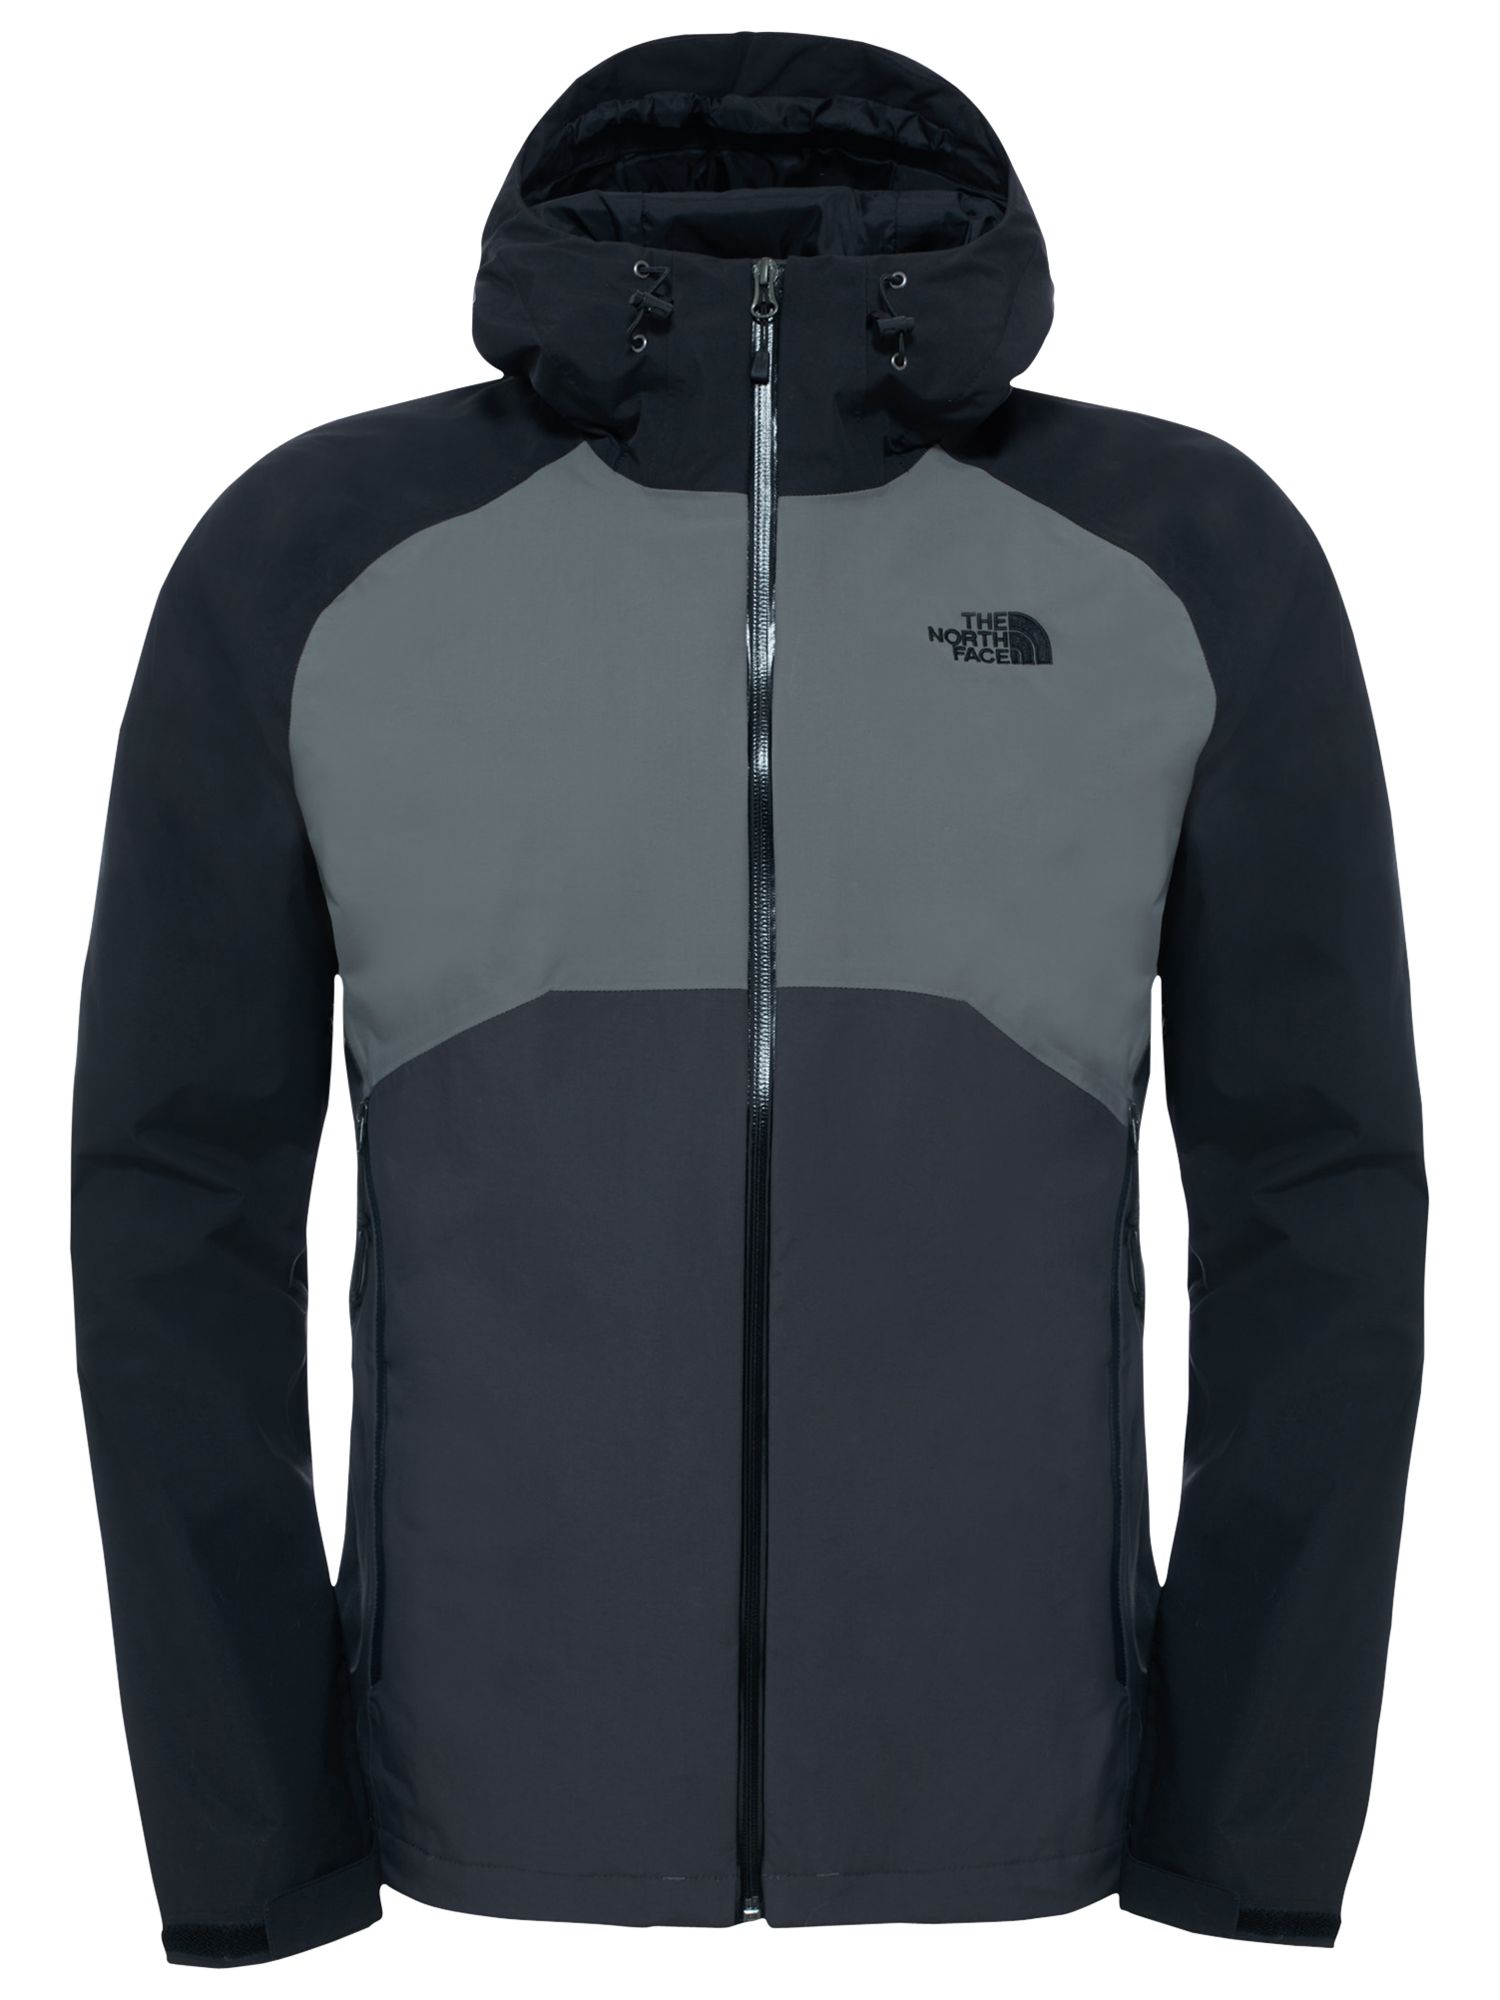 the north face stratos jacket mens